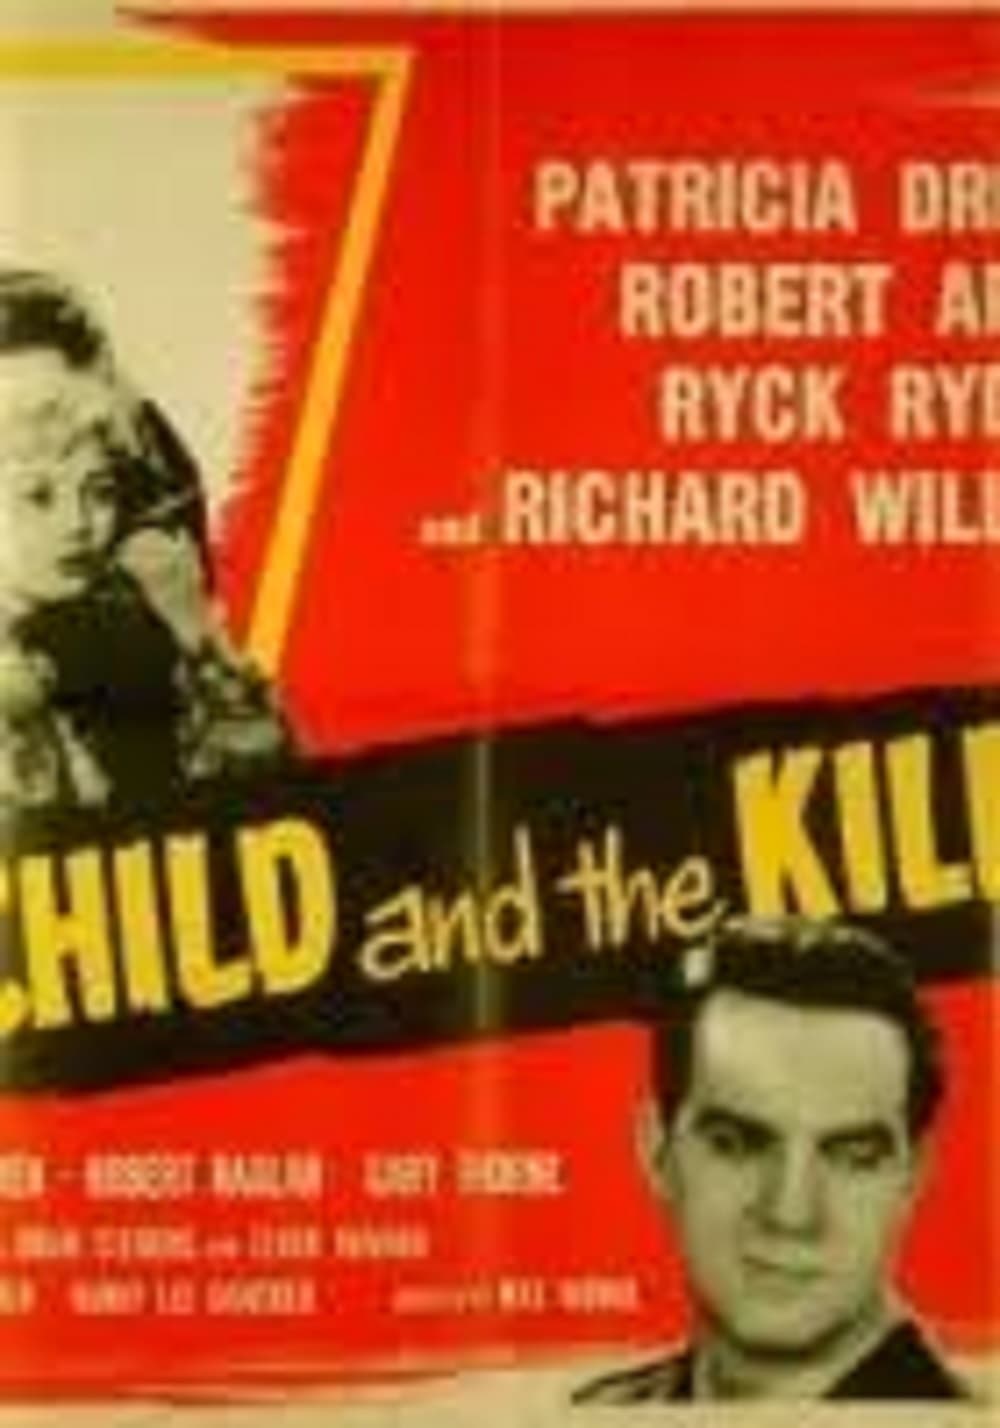 The Child and the Killer